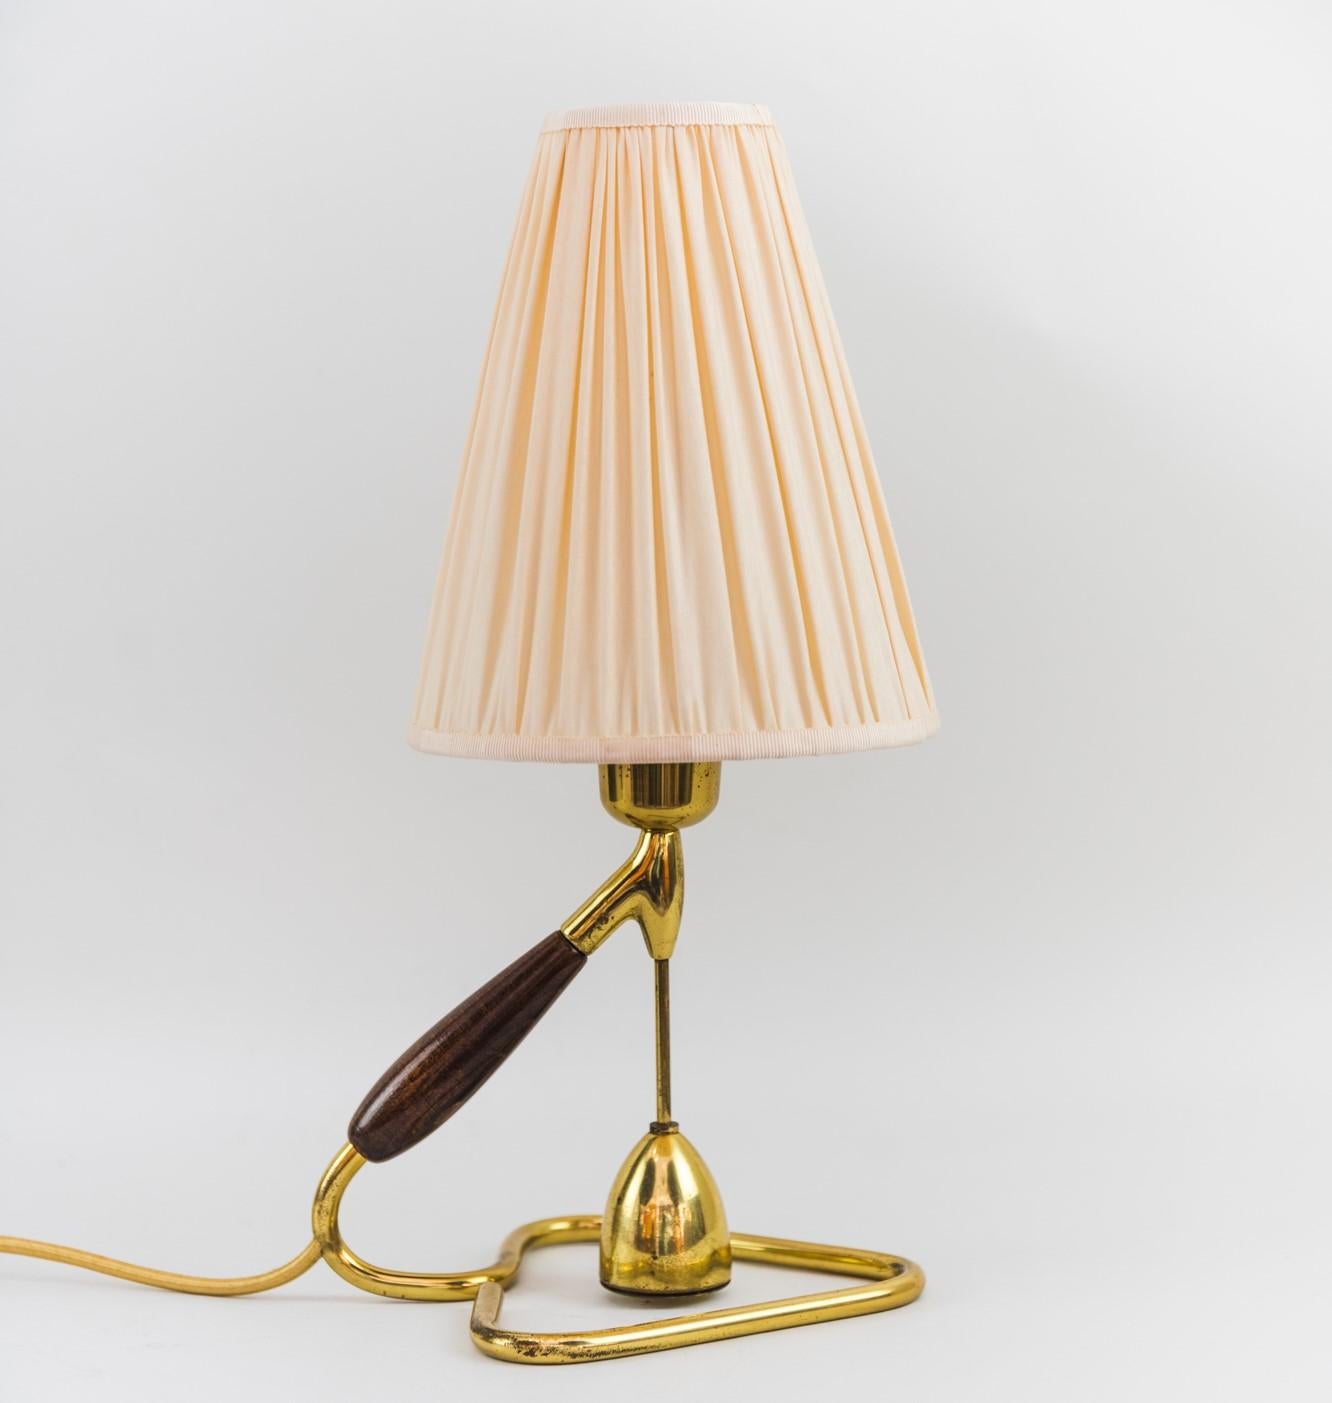 Rupert Nikoll table or wall lamp with original shade, circa 1950s
Original condition
The shade is replaced ( new ).